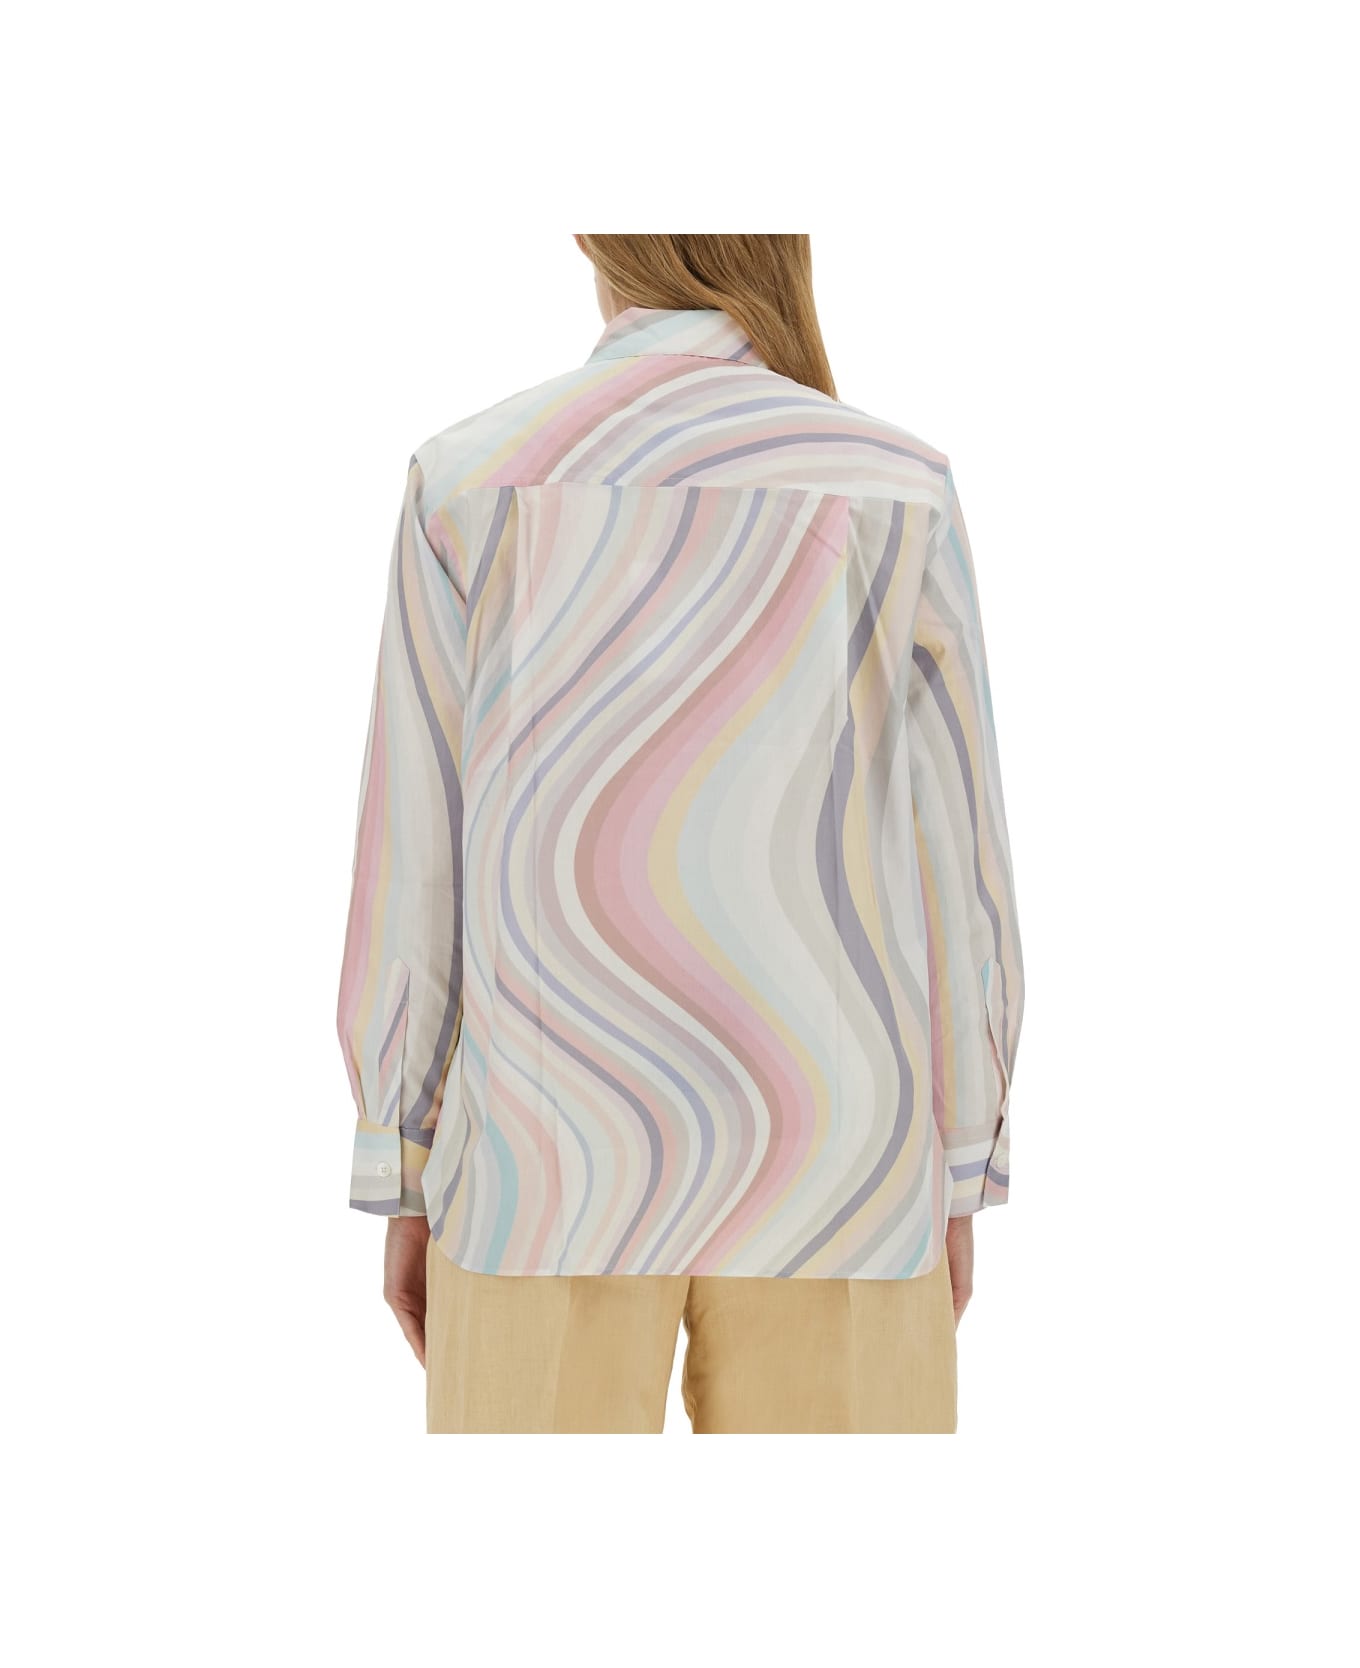 PS by Paul Smith "faded Swirl" Shirt - MULTICOLOUR